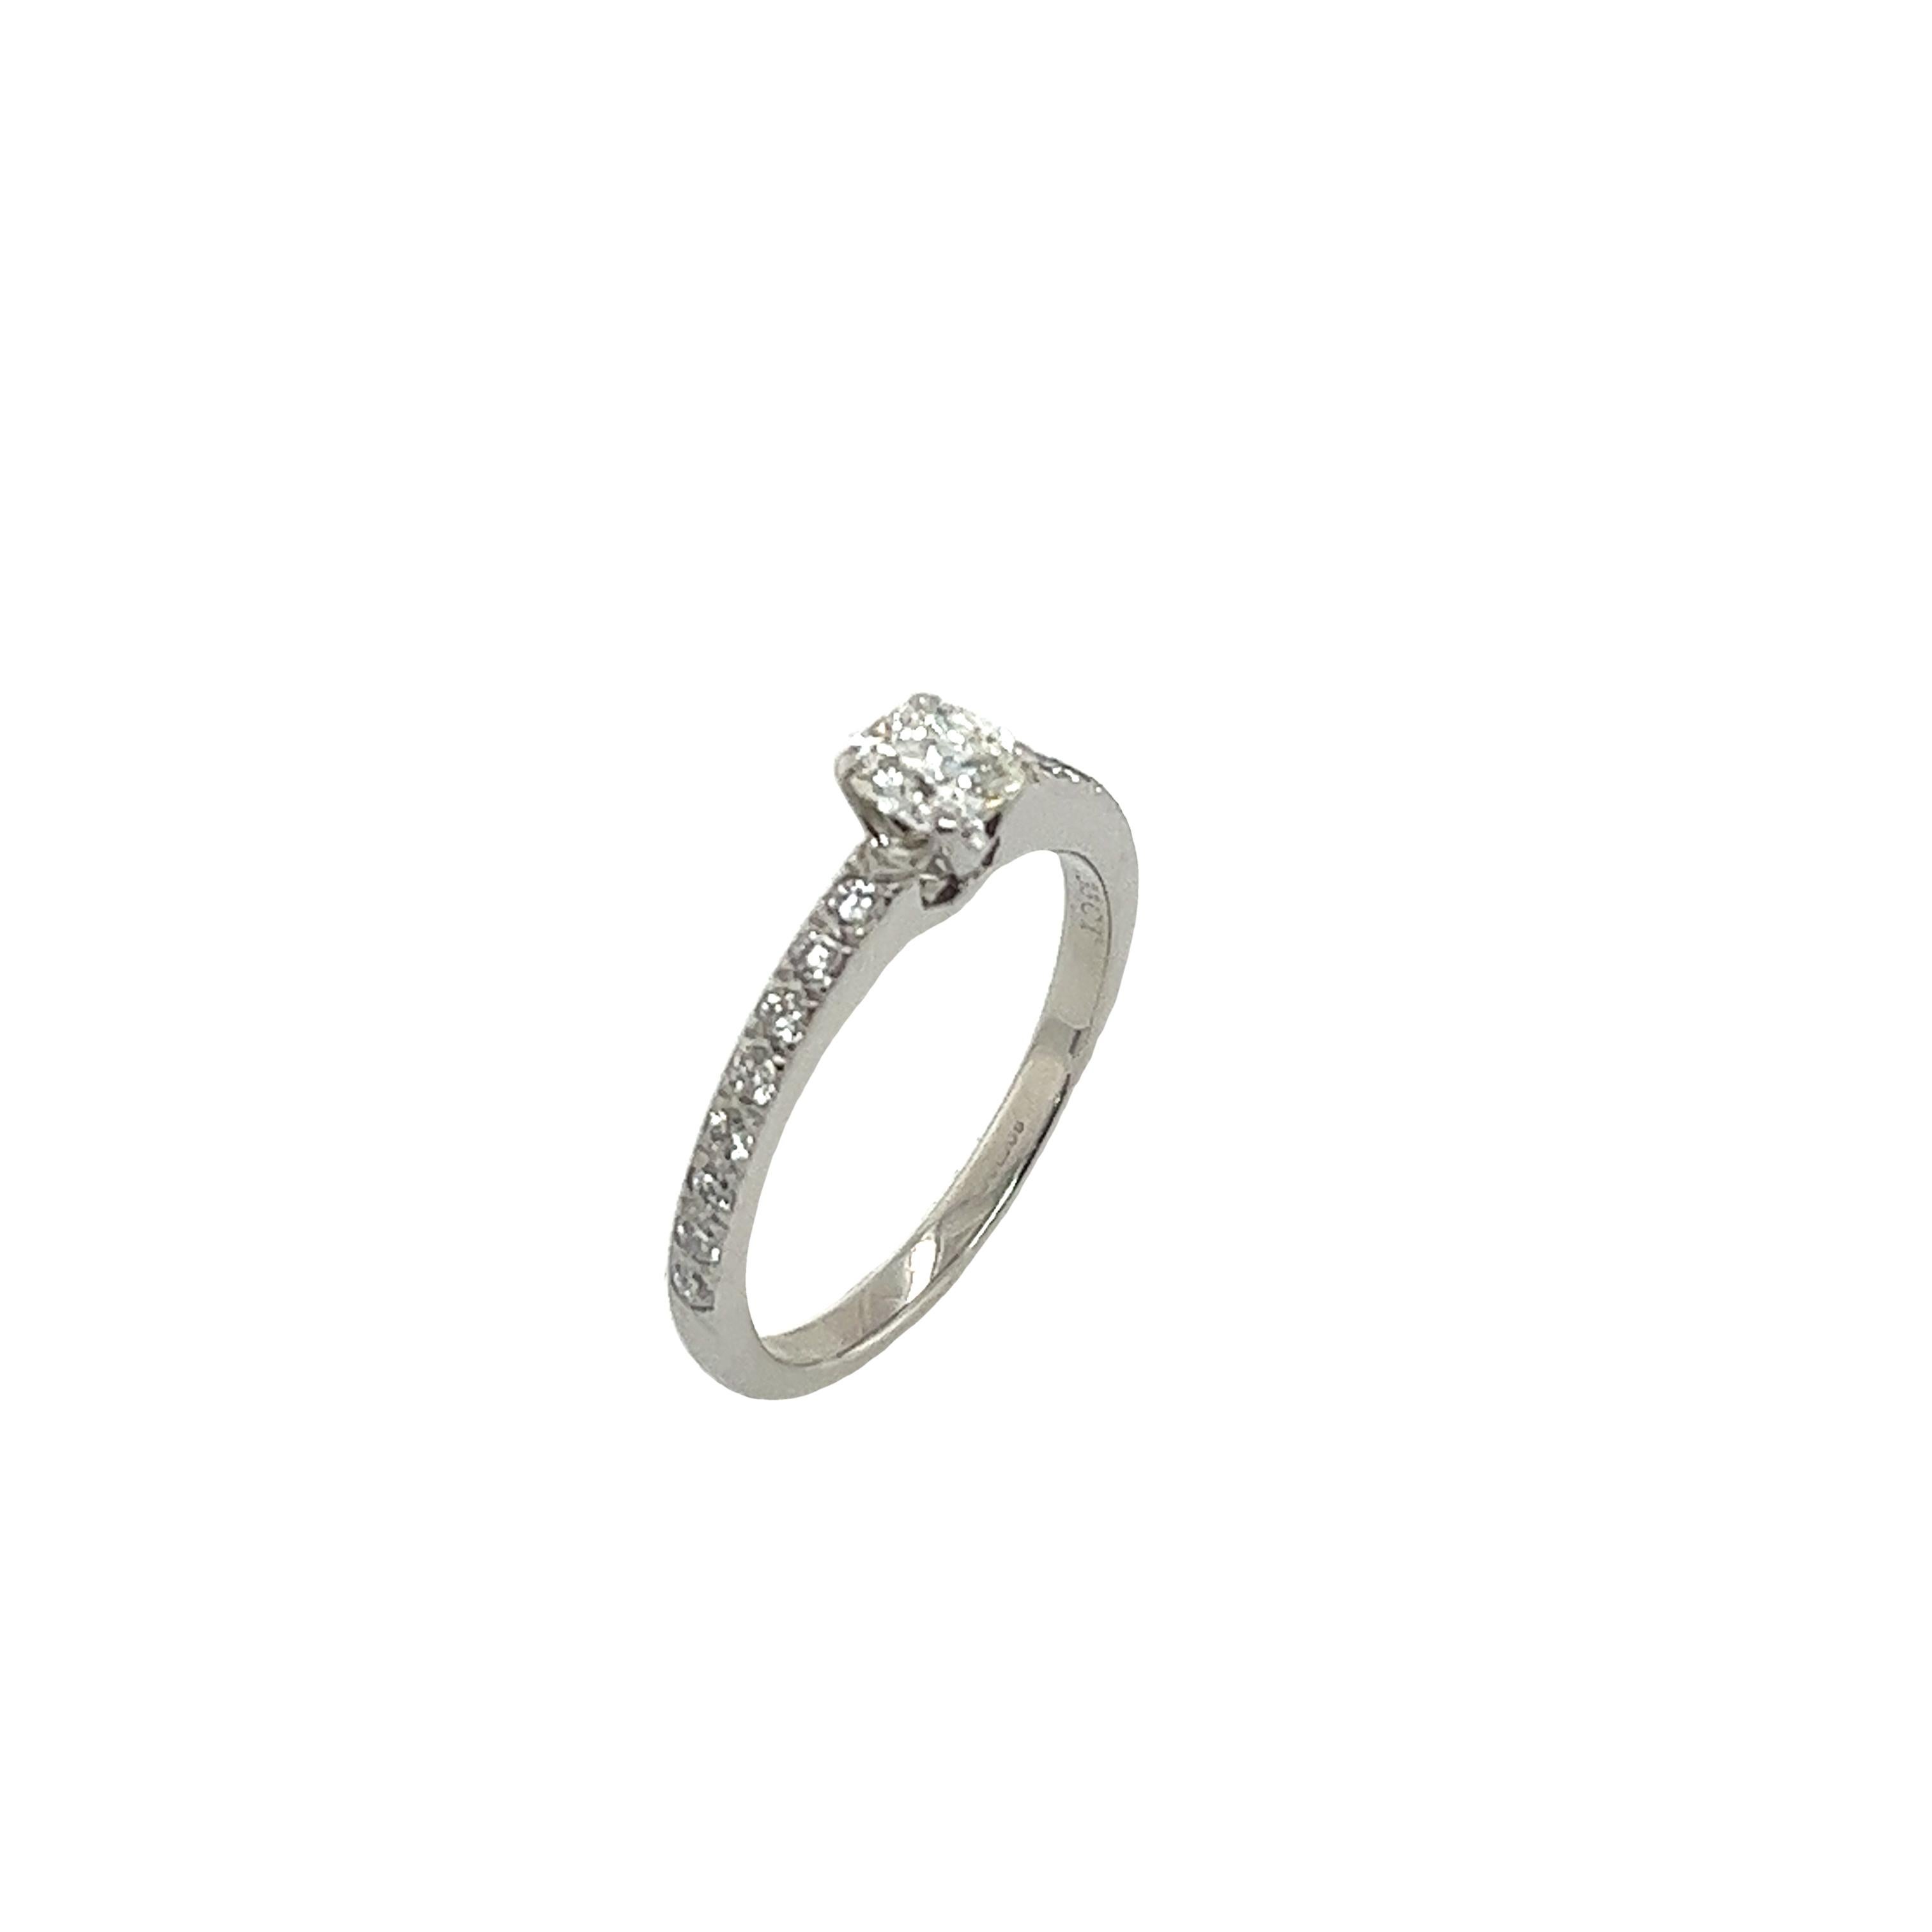 Discover elegance and sophistication with the Tiffany & Co 0.33ct Square Cushion Diamond Engagement Ring. This timeless piece features a brilliant 0.33-carat diamond set in platinum with additional diamonds on the shoulders, symbolizing eternal love